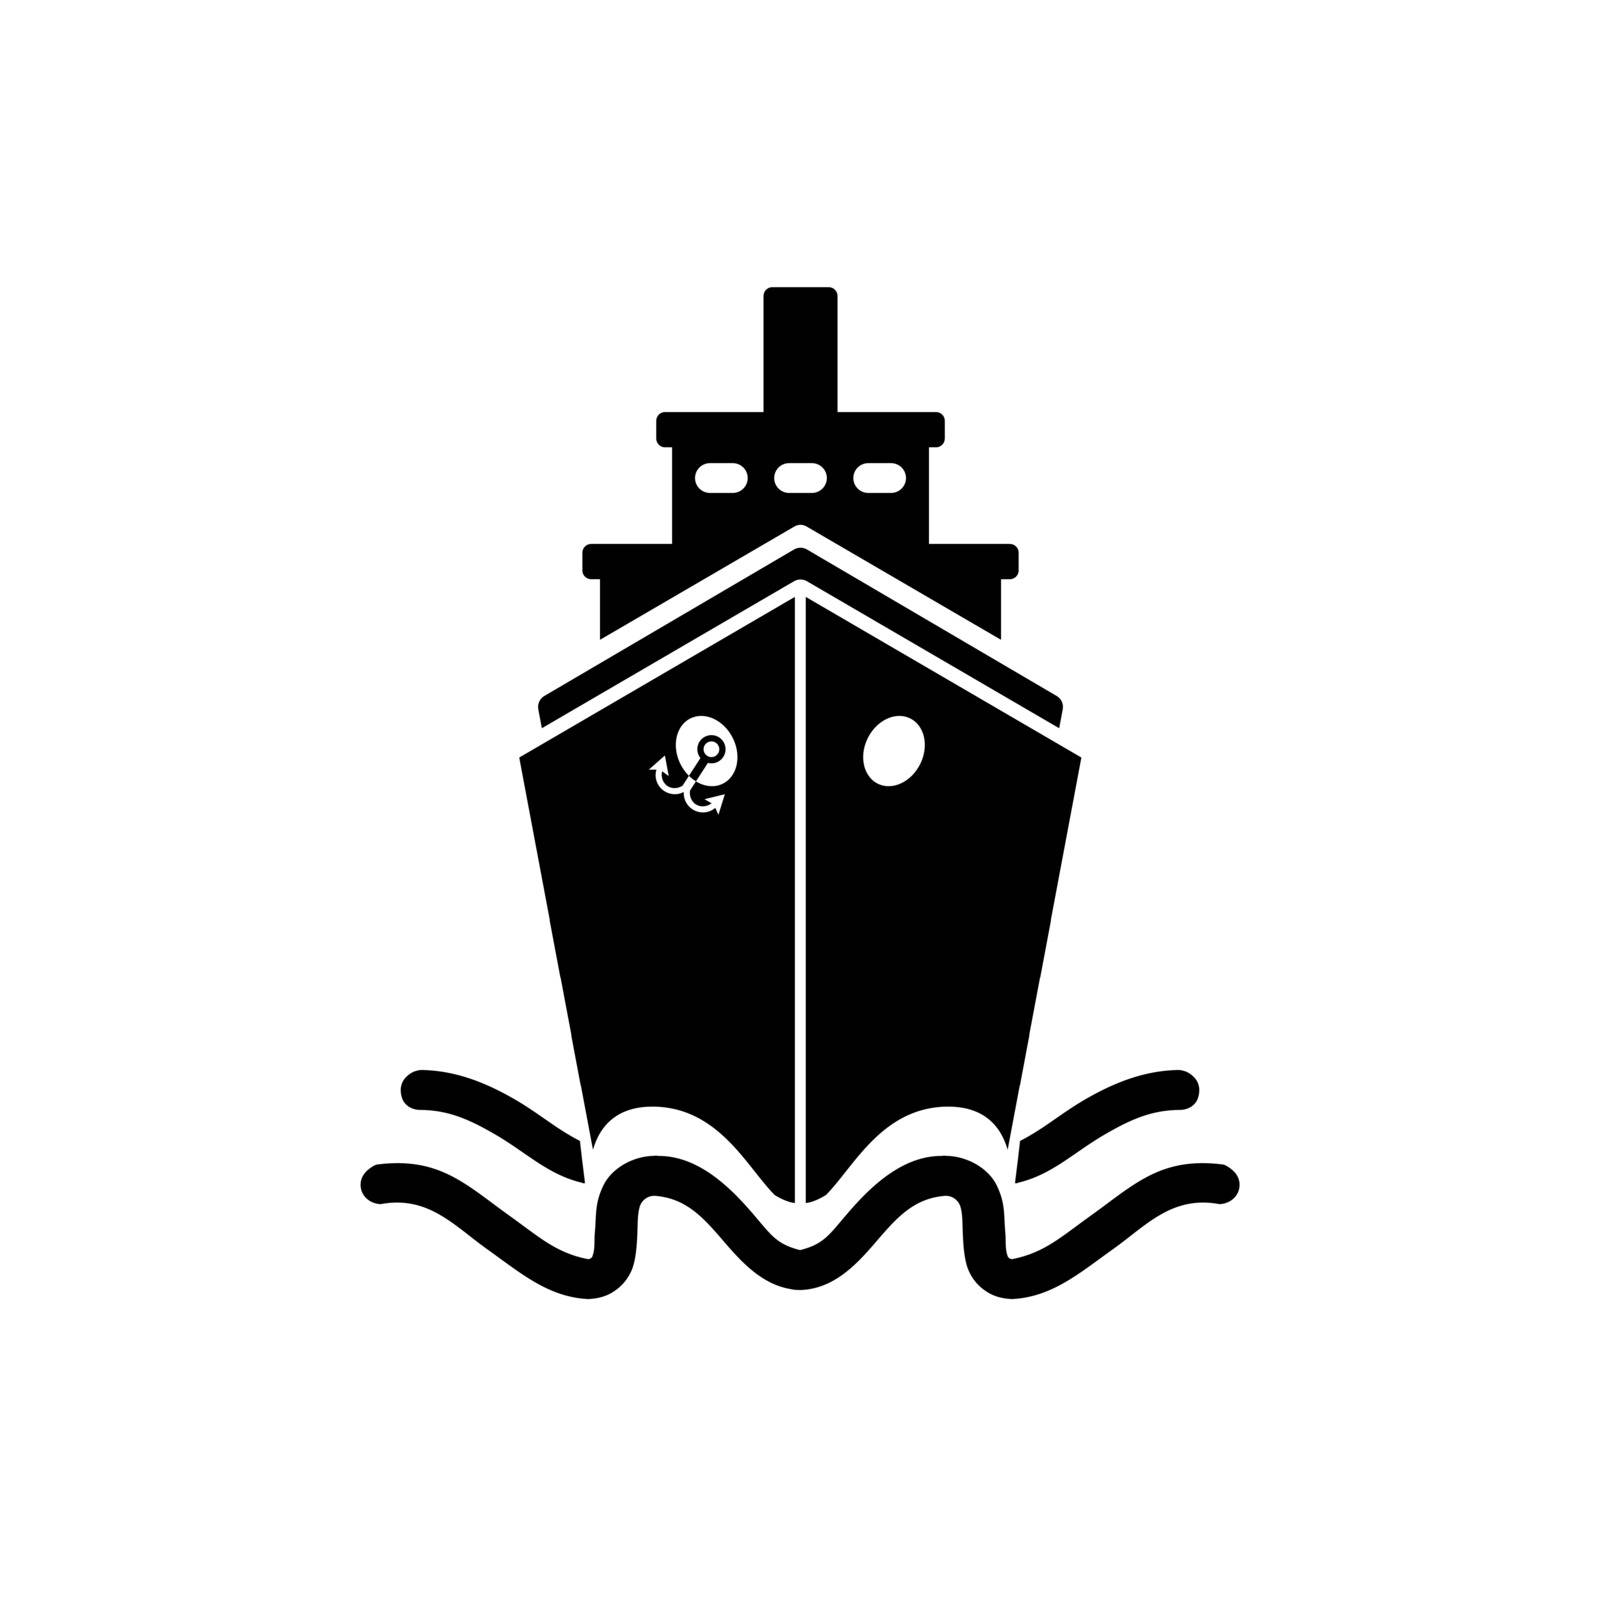 Ship icon in flat style. Black pictogram on white by veronawinner